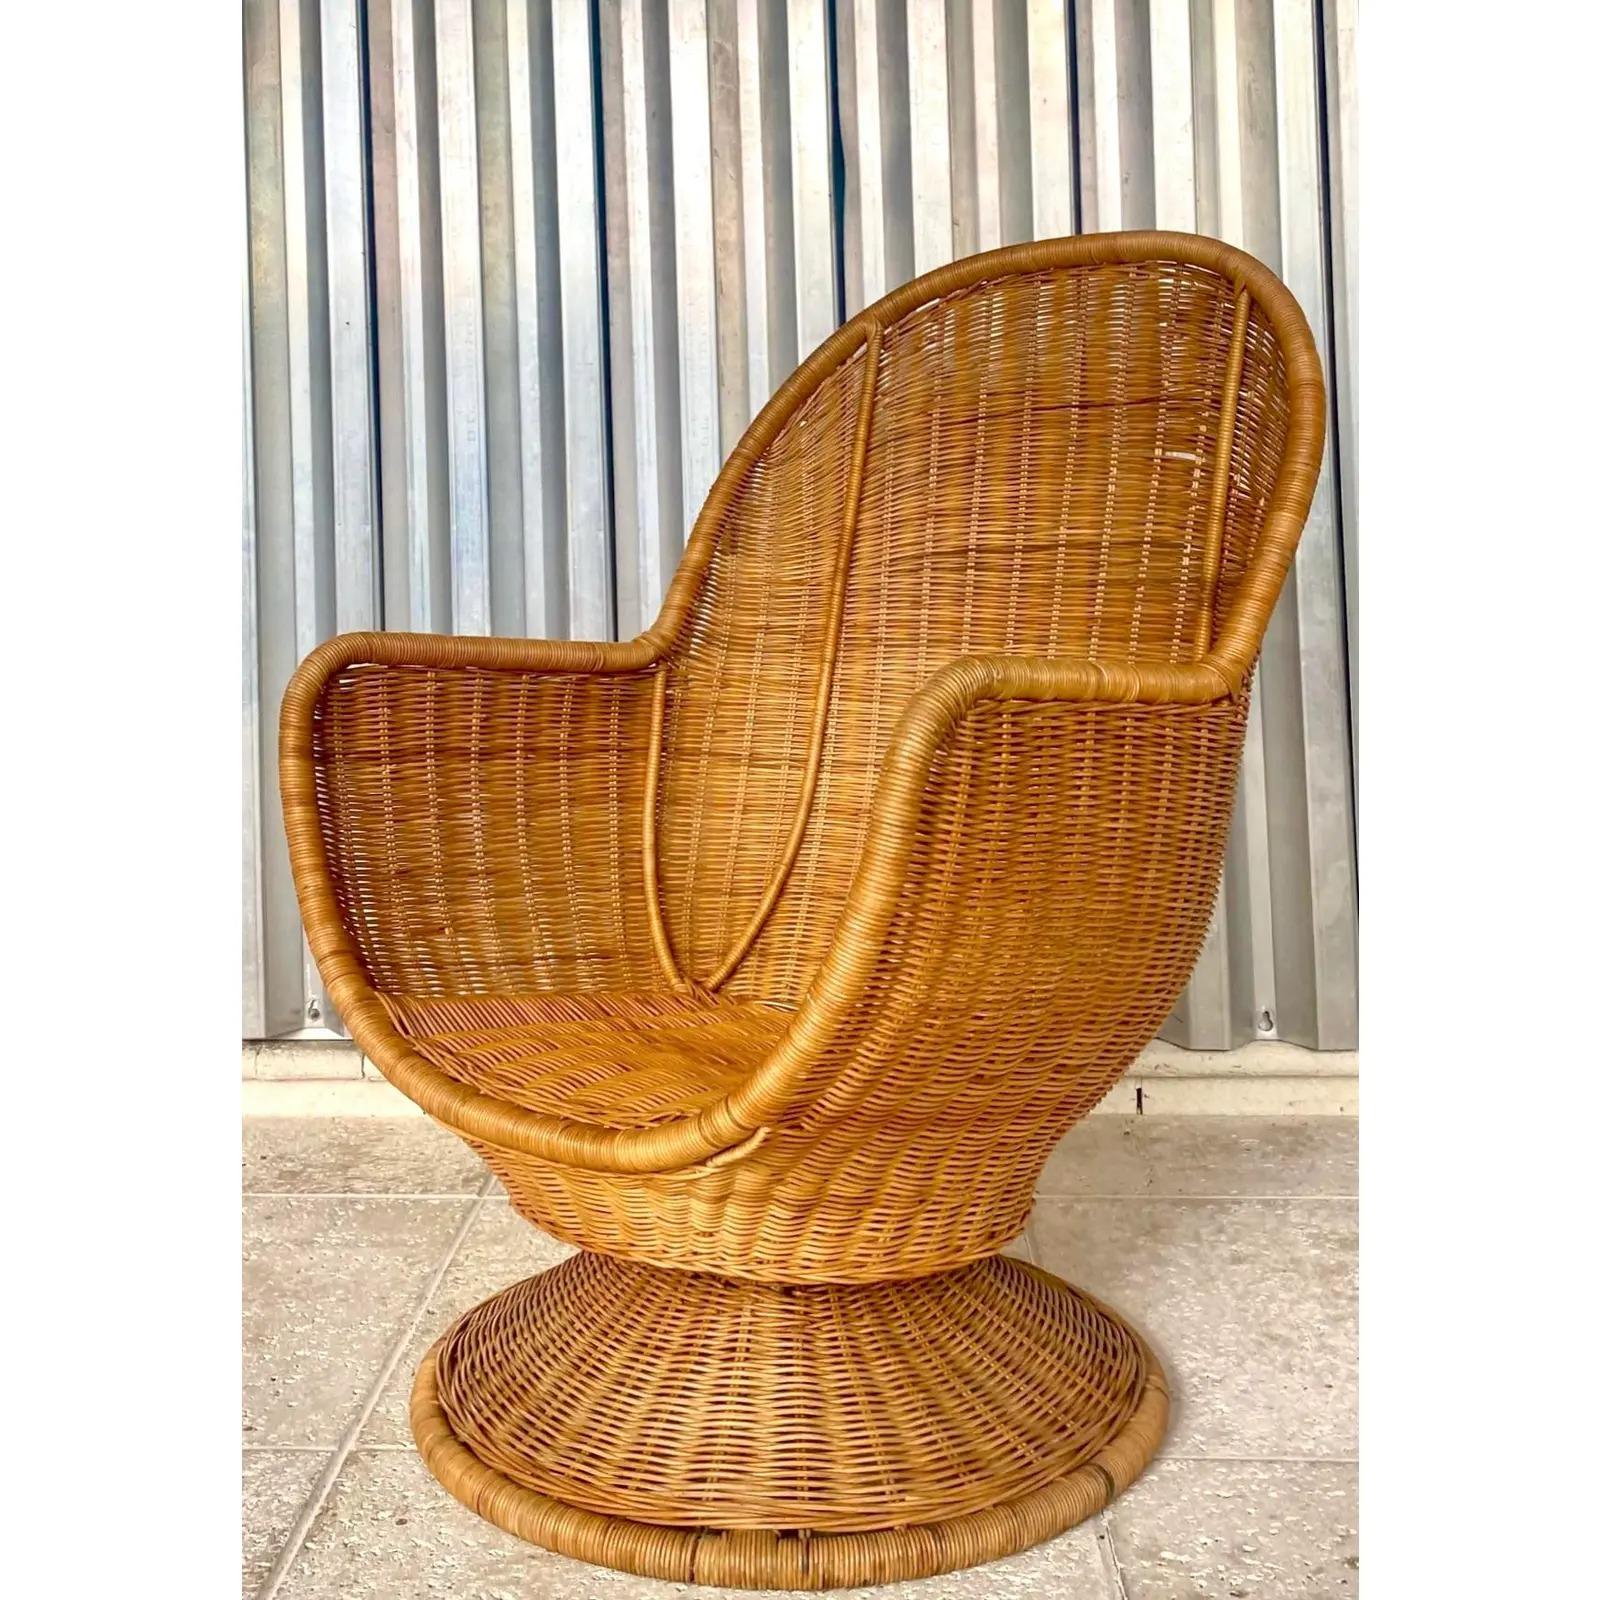 Fantastic vintage Coastal woven rattan swivel chair. A chic egg shape with high sides and back. Acquired from a Palm Beach estate.